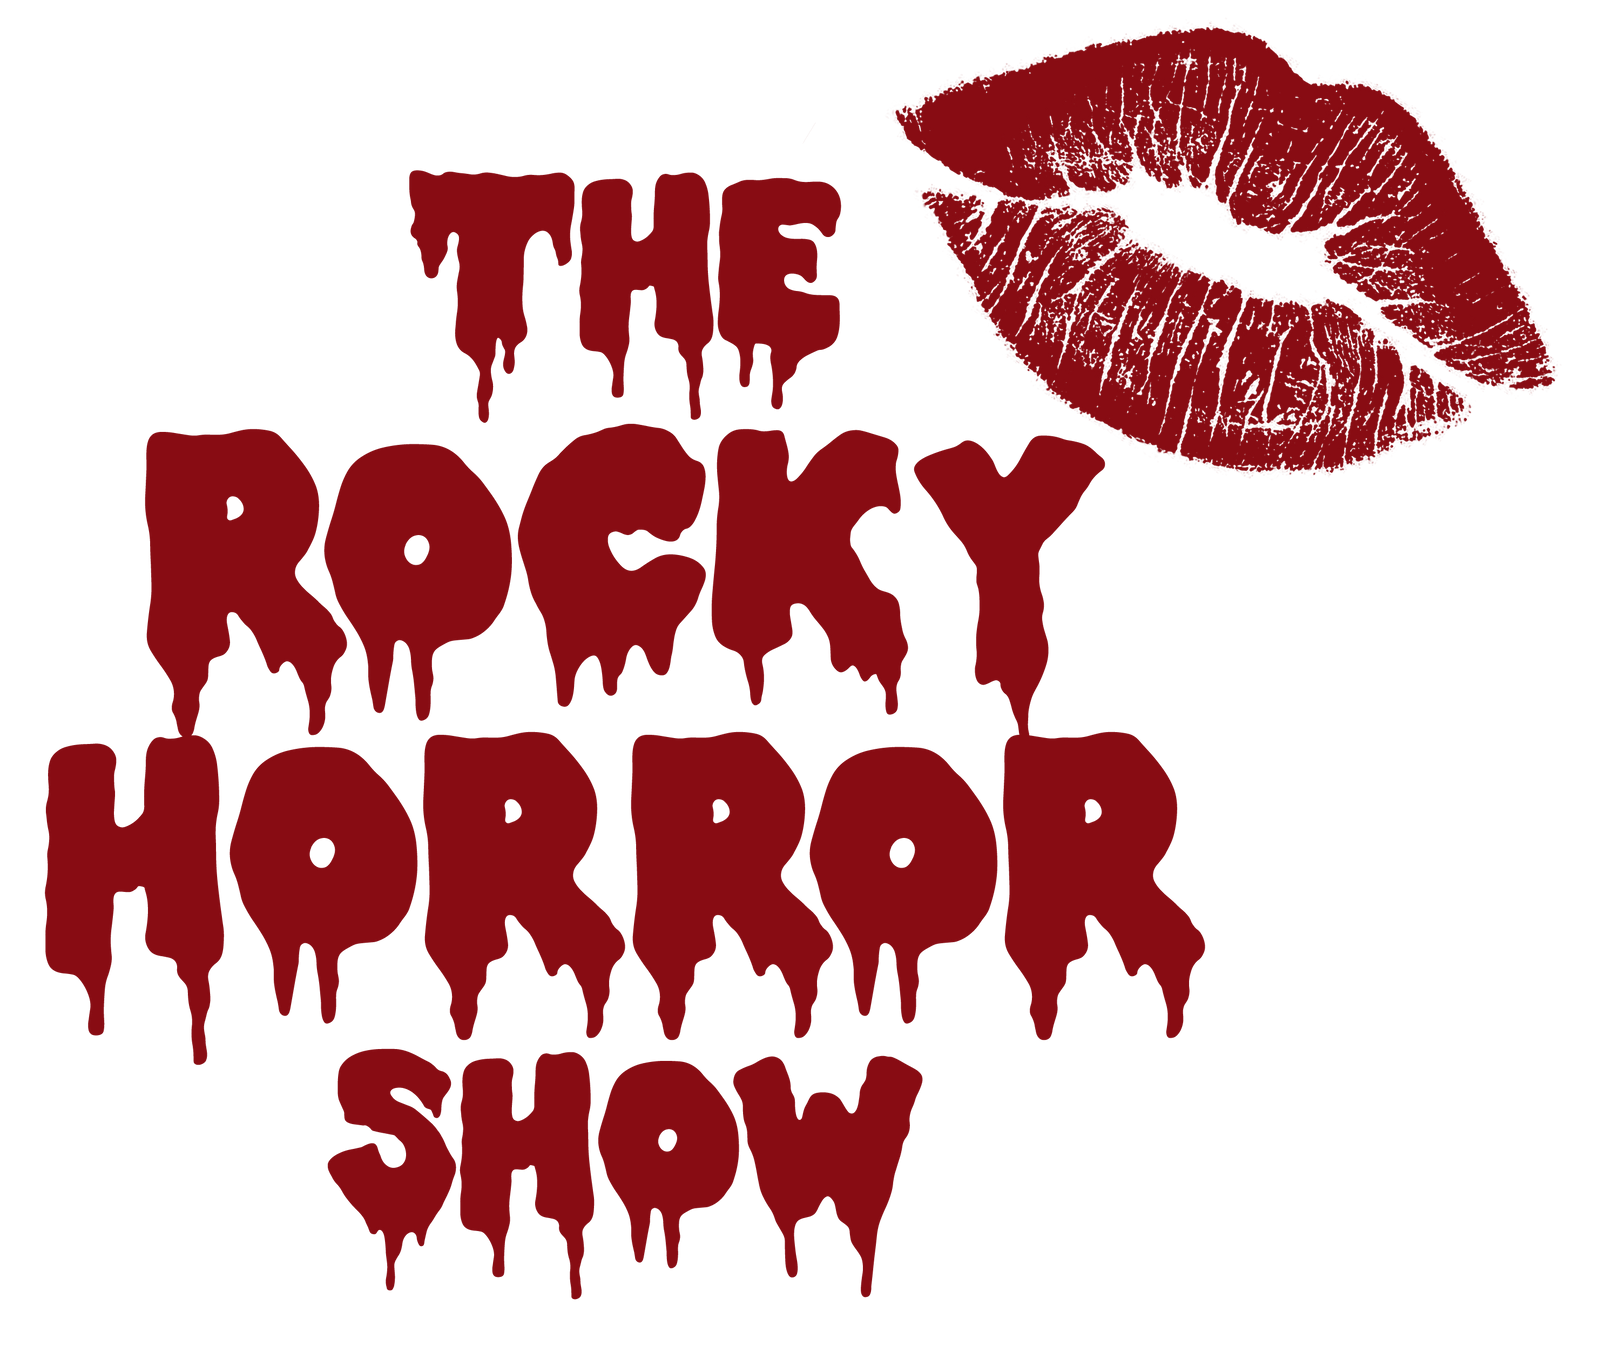 Rocky Horror Picture Show logo.